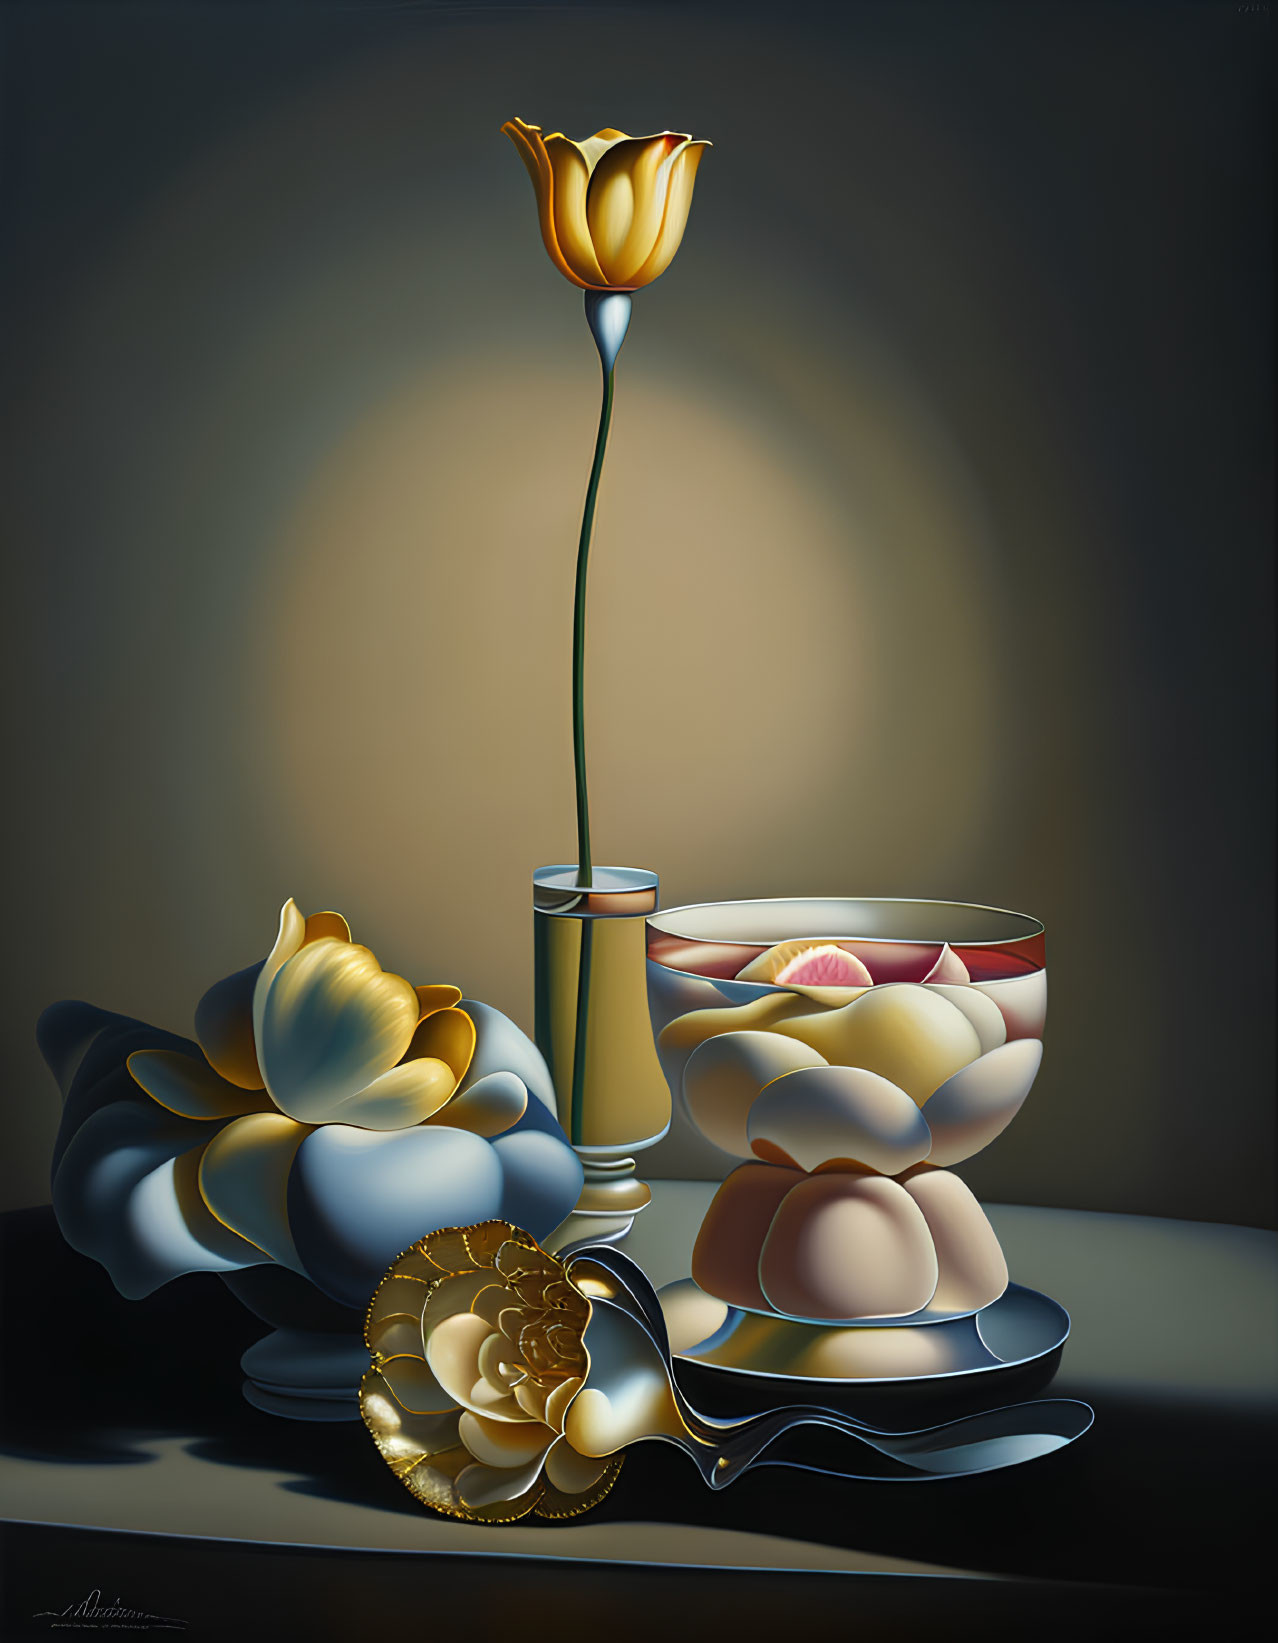 Yellow tulip in tall glass vase with candies and plates.